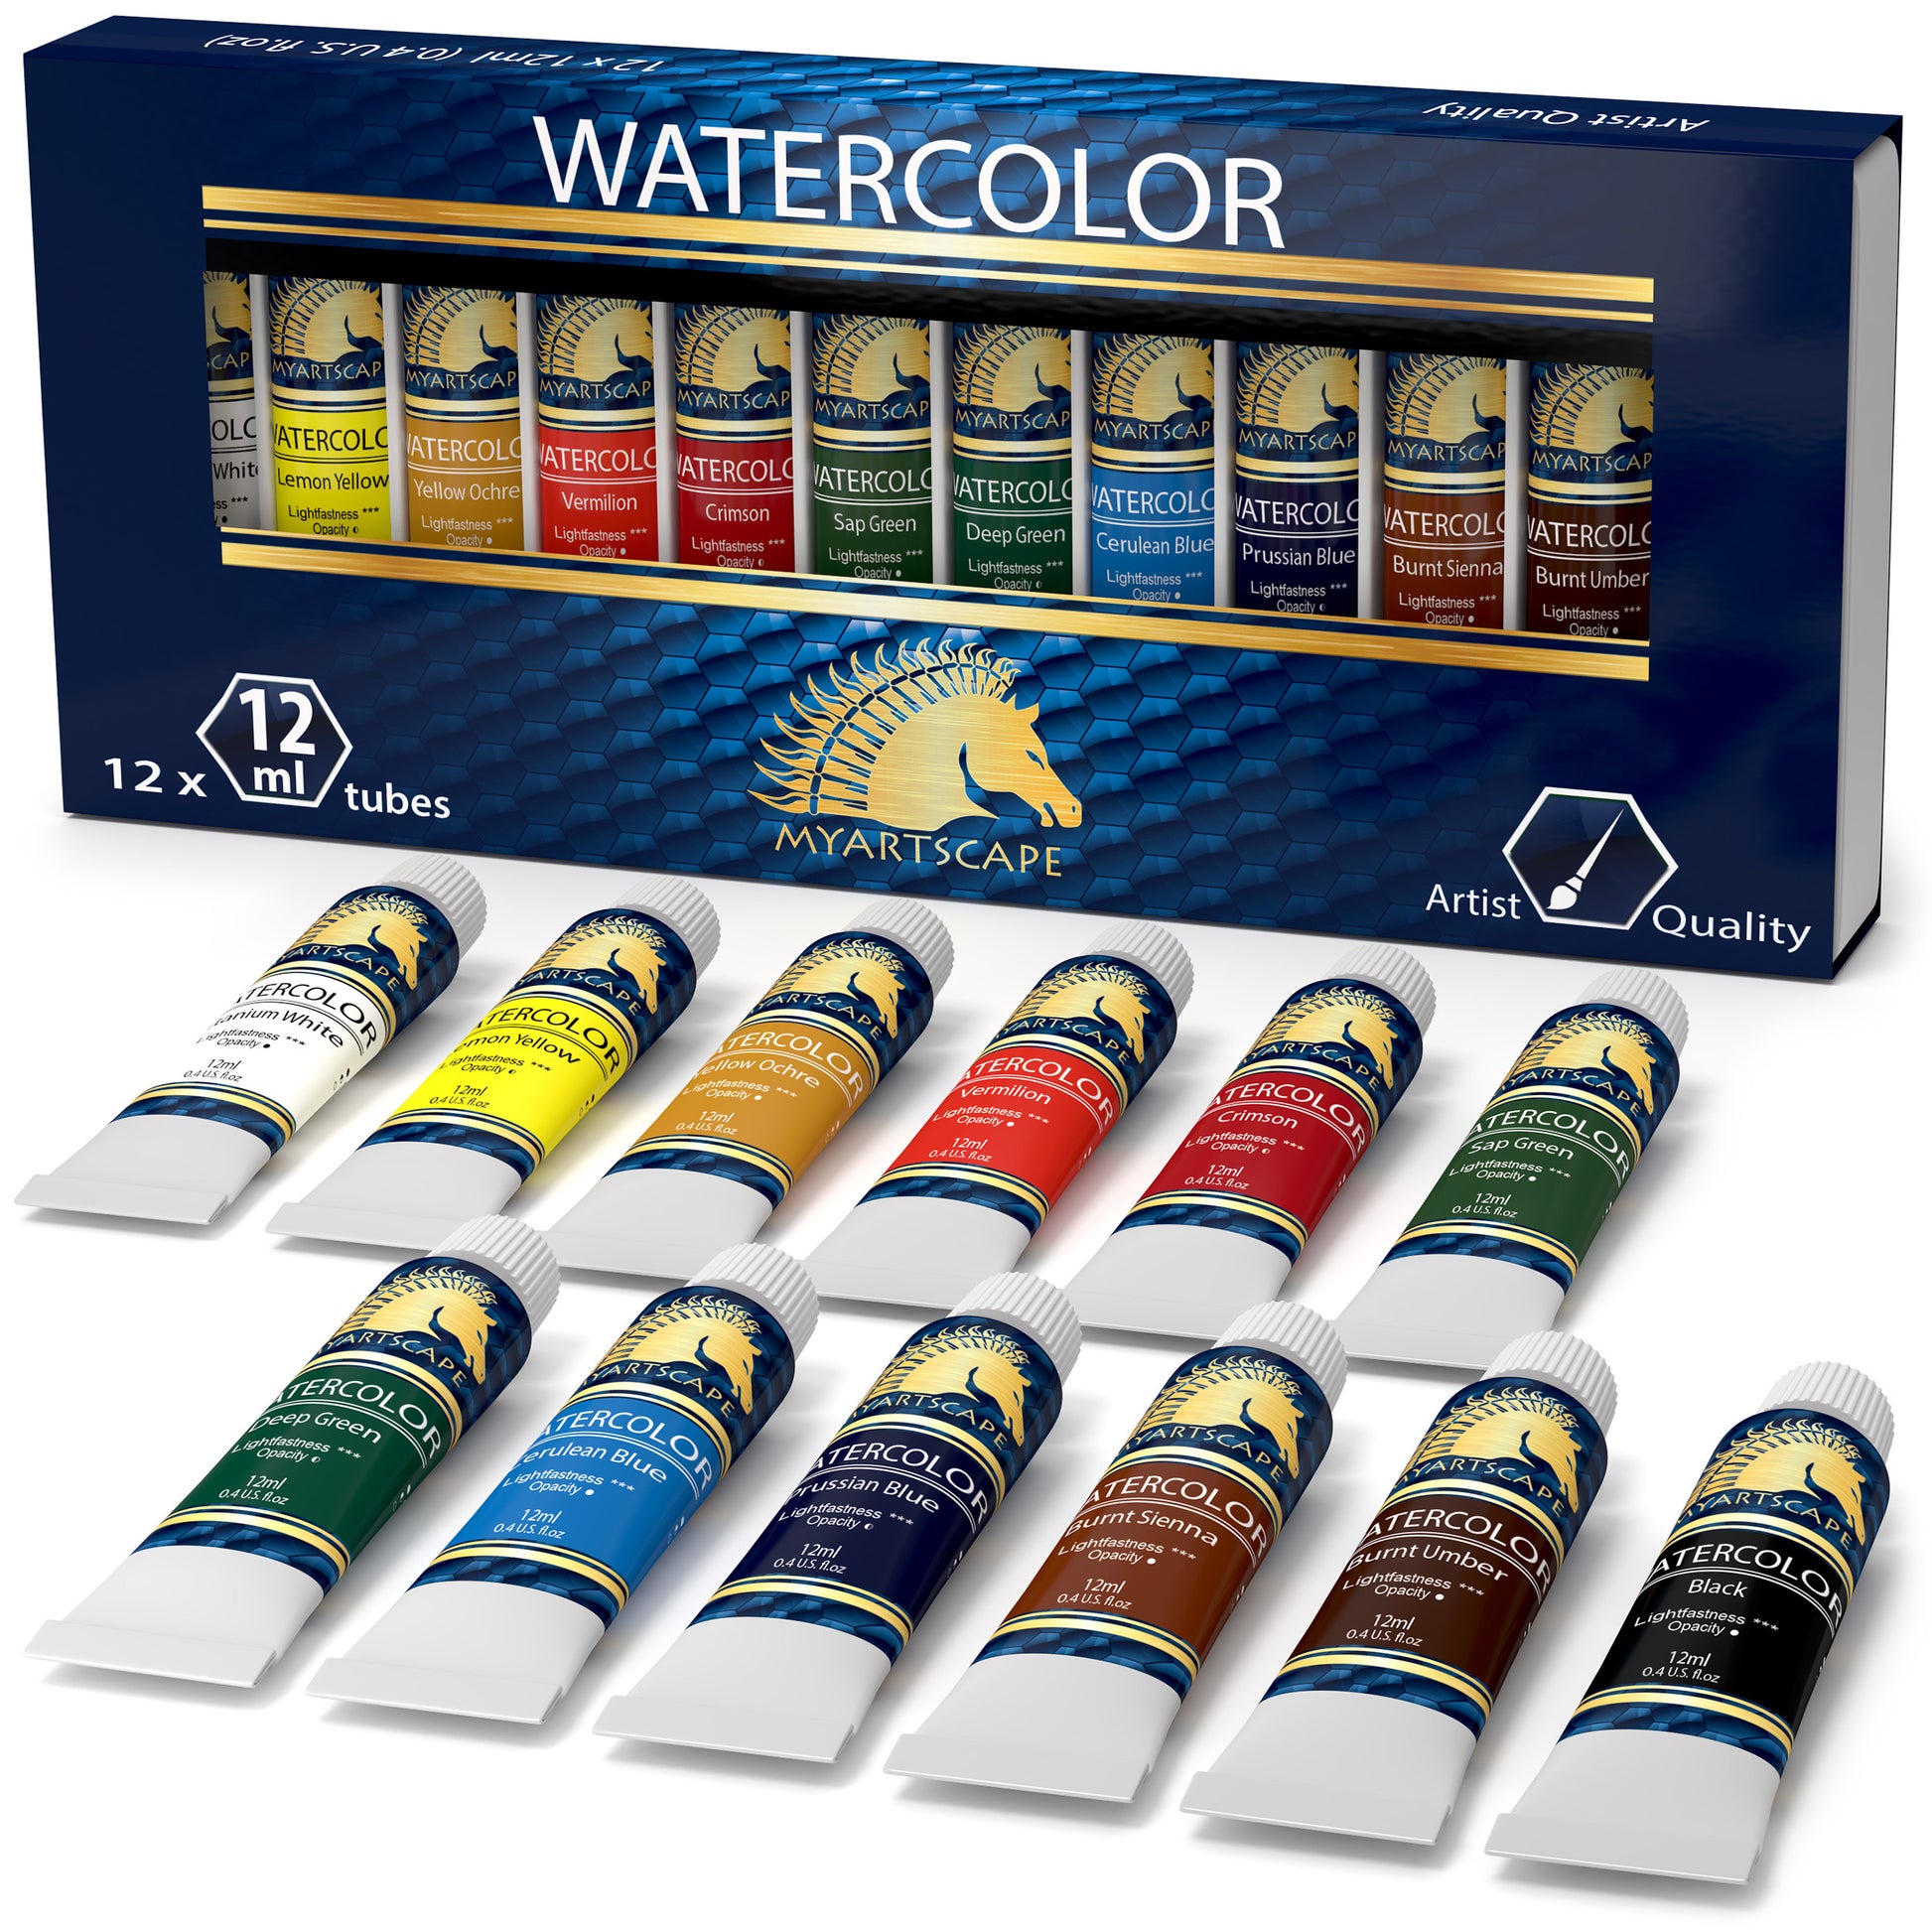 12ml tubes watercolor artist quality